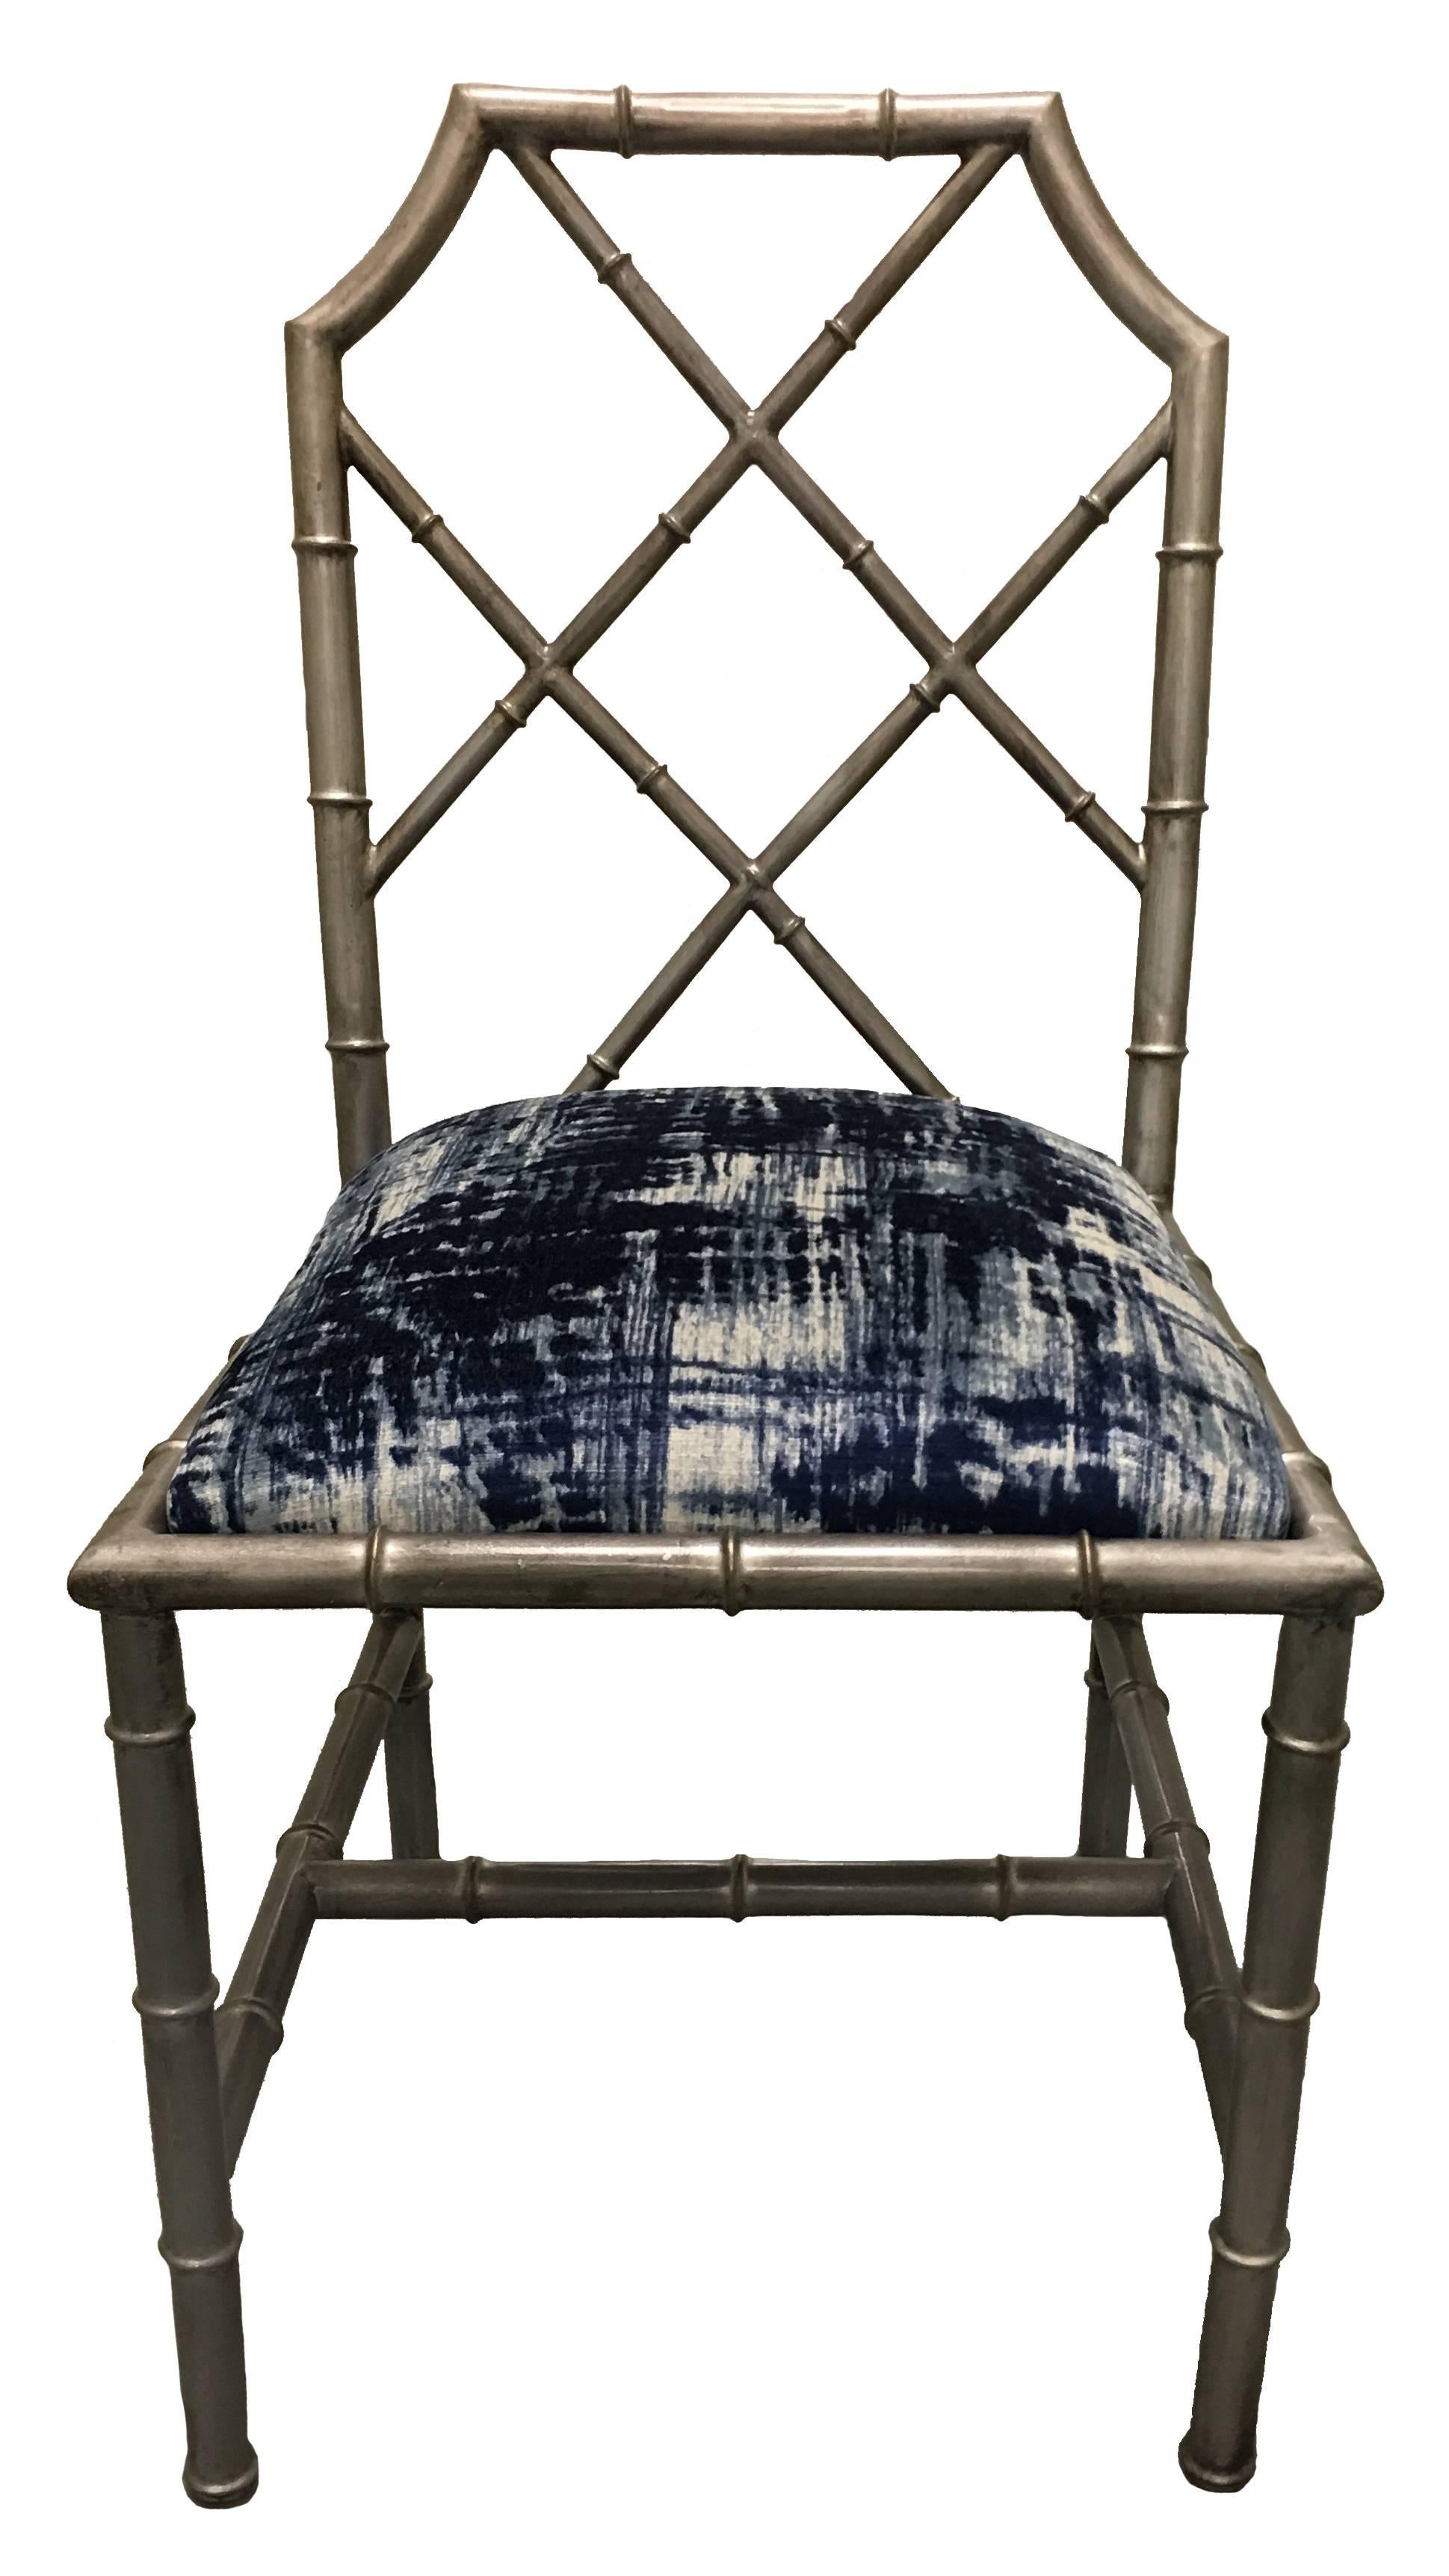 Pair of Italian metal bamboo side chairs. Recently repainted in a burnished faux silver leaf finish. Newly upholstered in Ralph Lauren abstract printed blue or white velvet. Stamped on the underside 'Made in Italy'. Measures: Seat is 17.5